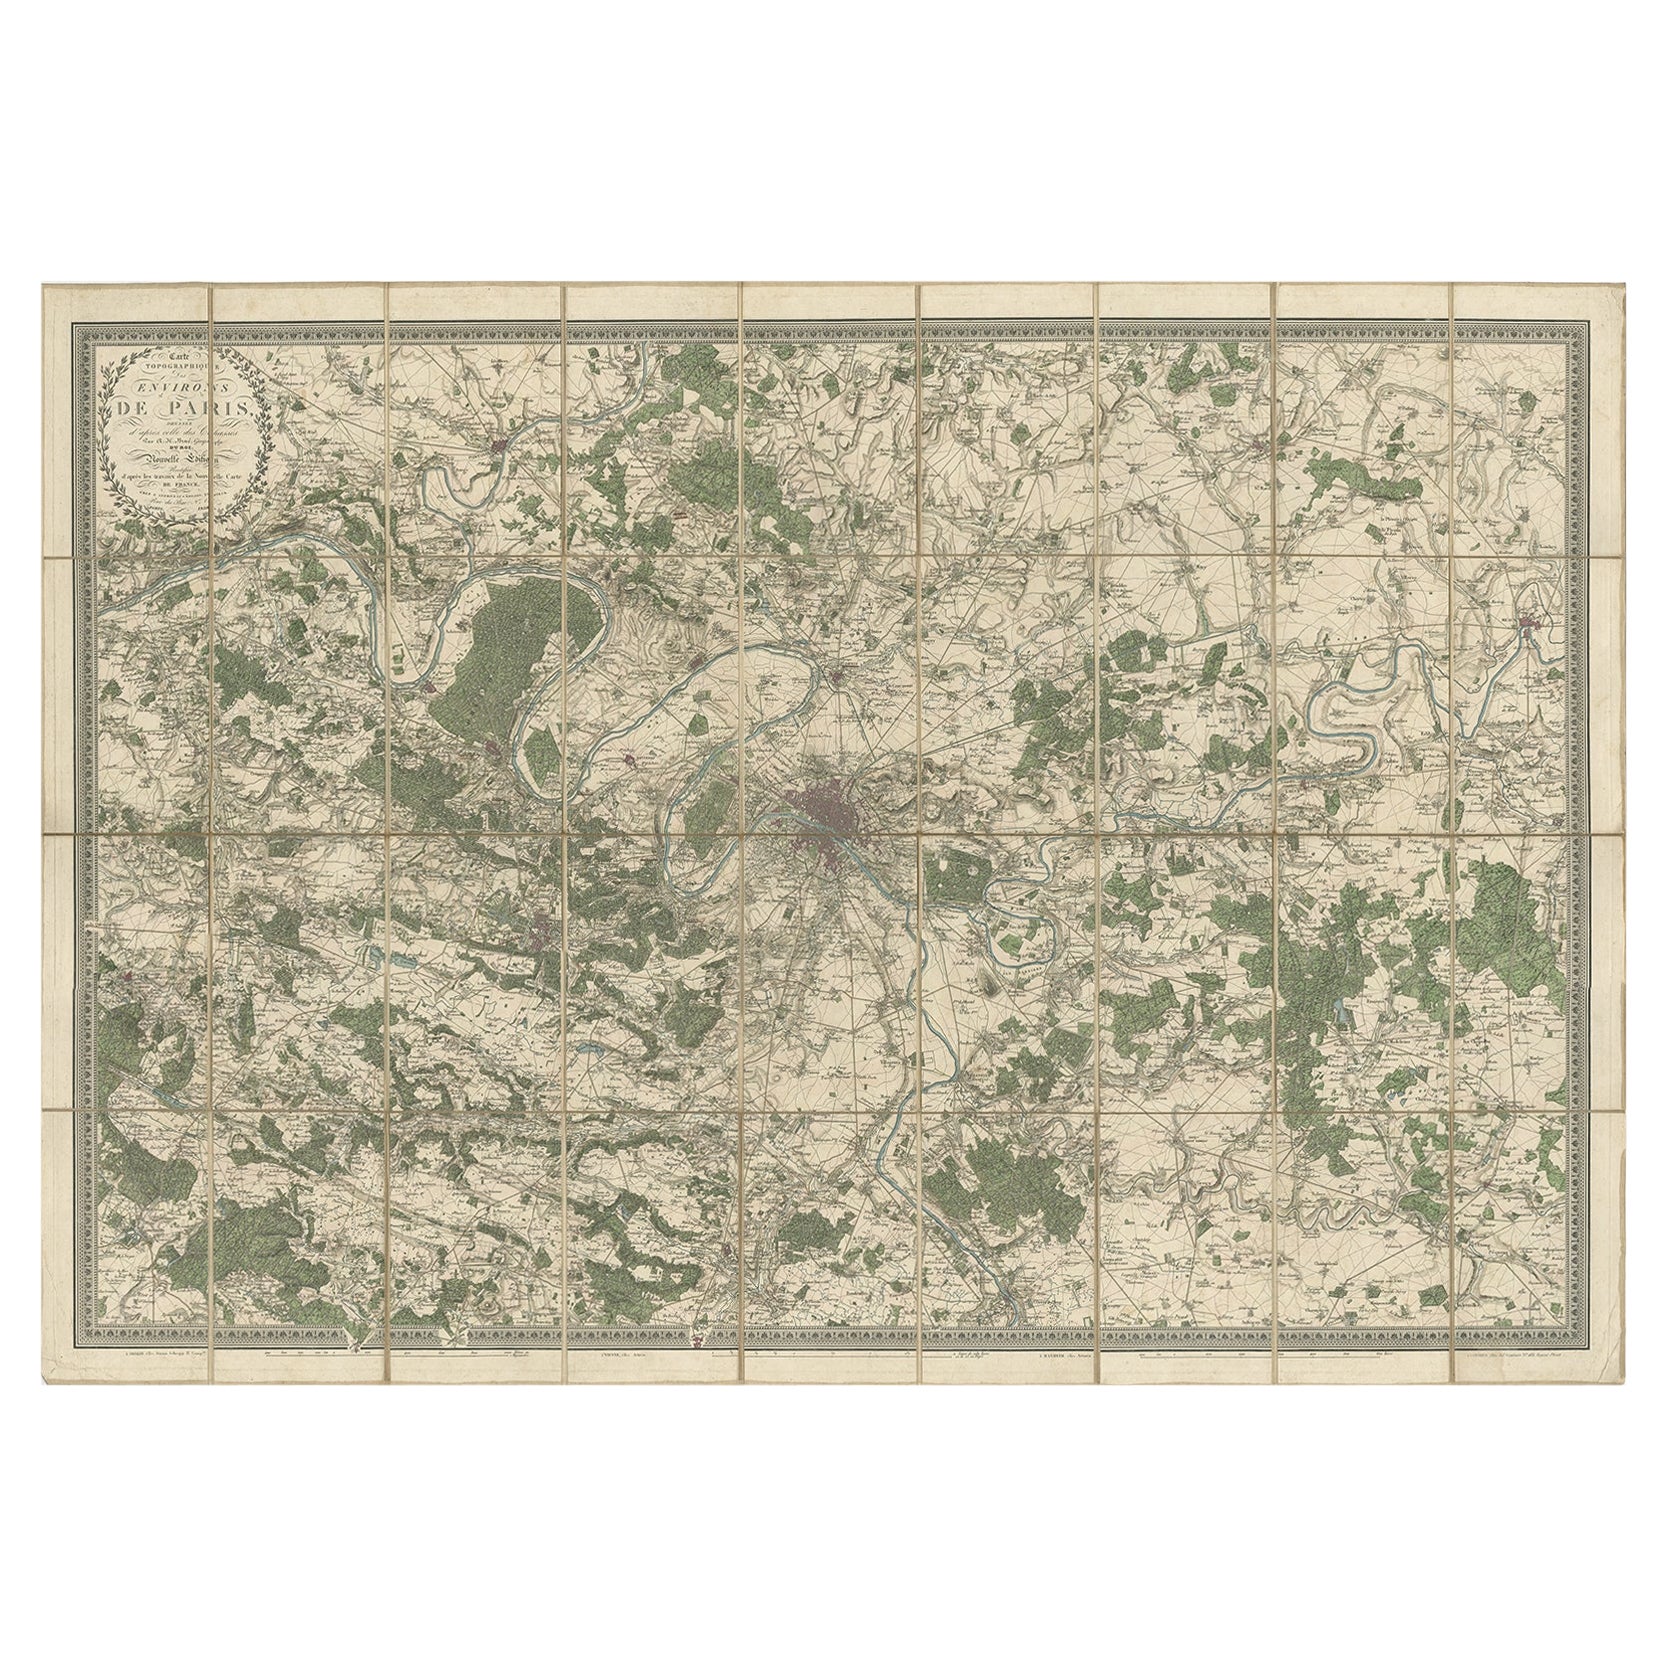 Large Folding Map of Paris, France, on Linen, 36 Segments, Published in 1836